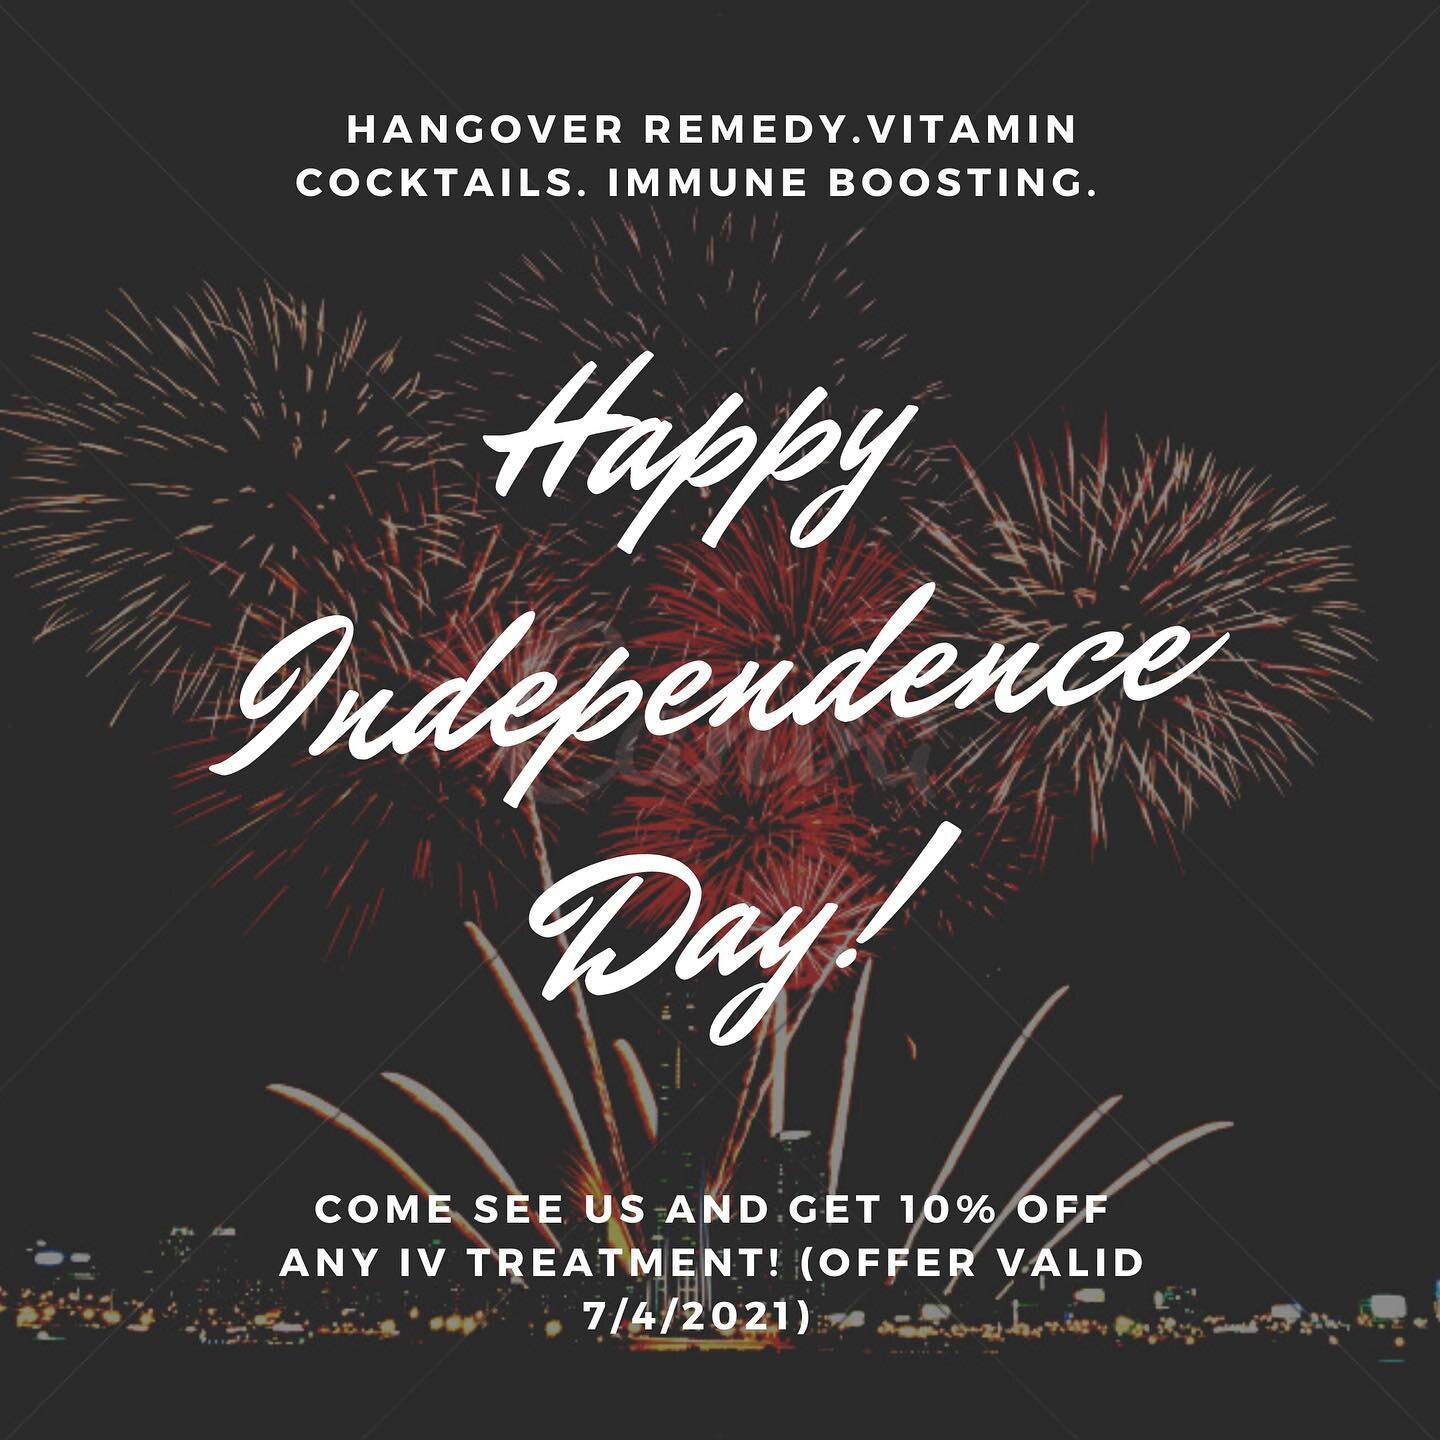 HAPPY INDEPENDENCE DAY! 🎆 we are OPEN today, so come see us to feel great before celebrating America&rsquo;s birthday! Make sure you mention this post to SuzyJo so you can get your 10% off! Call 305-509-0919 to schedule tour IV treatment! #ivhydrati